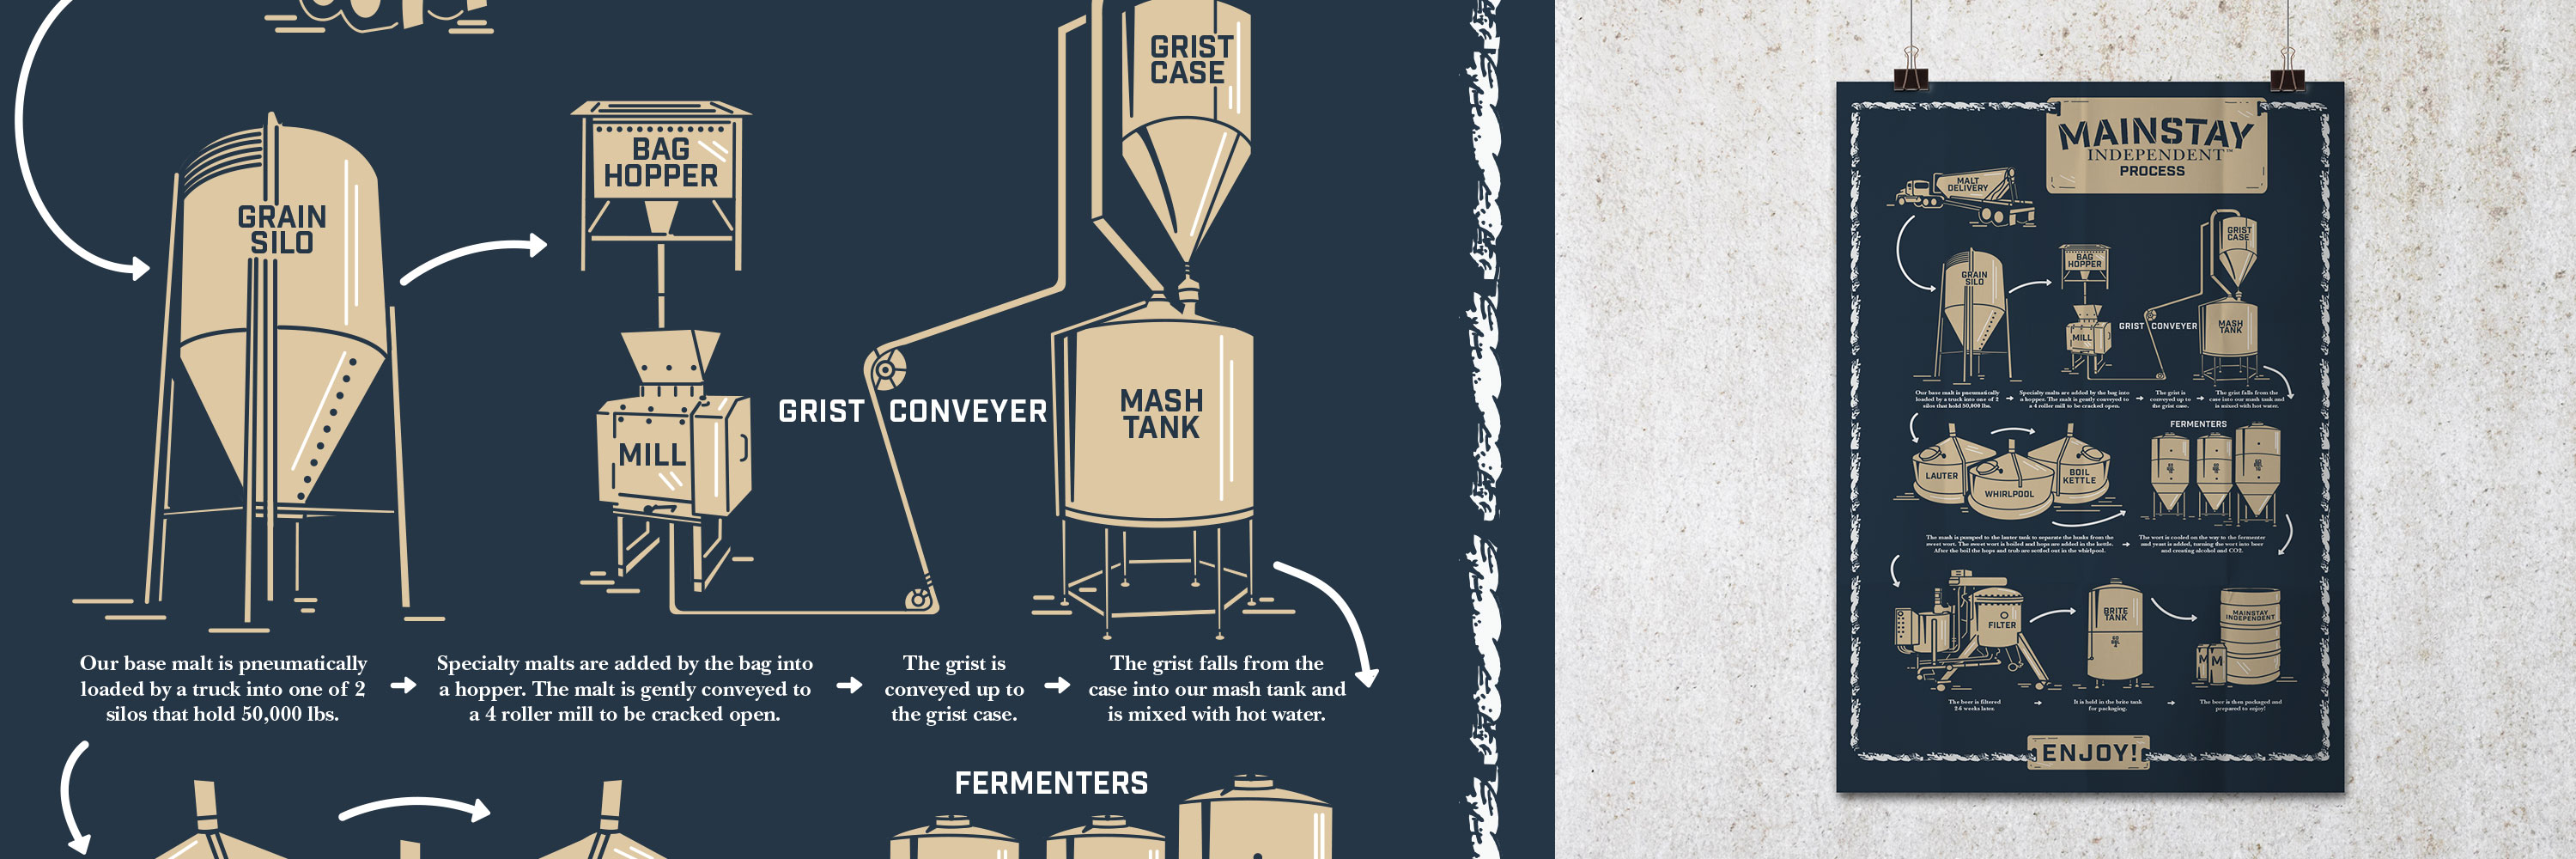 Brewing Process Custom Illustration for Mainstay Independent Philadelphia, PA